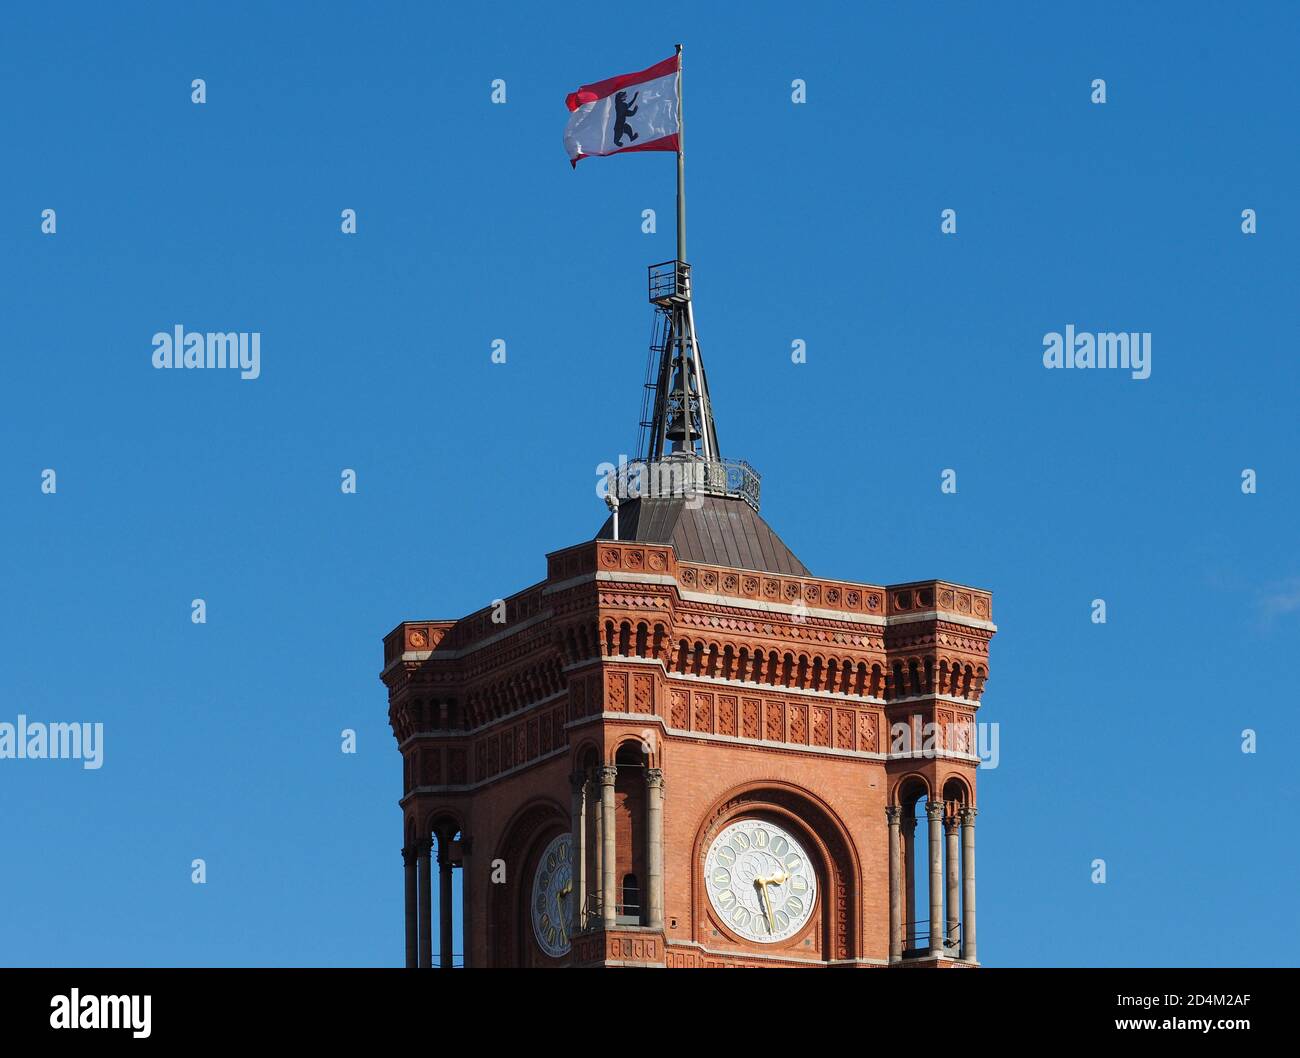 04 October 2020, Berlin: The flag with the Berlin coat of arms is waving on the top of the tower of the Rotes Rathaus. Photo: Soeren Stache/dpa-Zentralbild/ZB Stock Photo